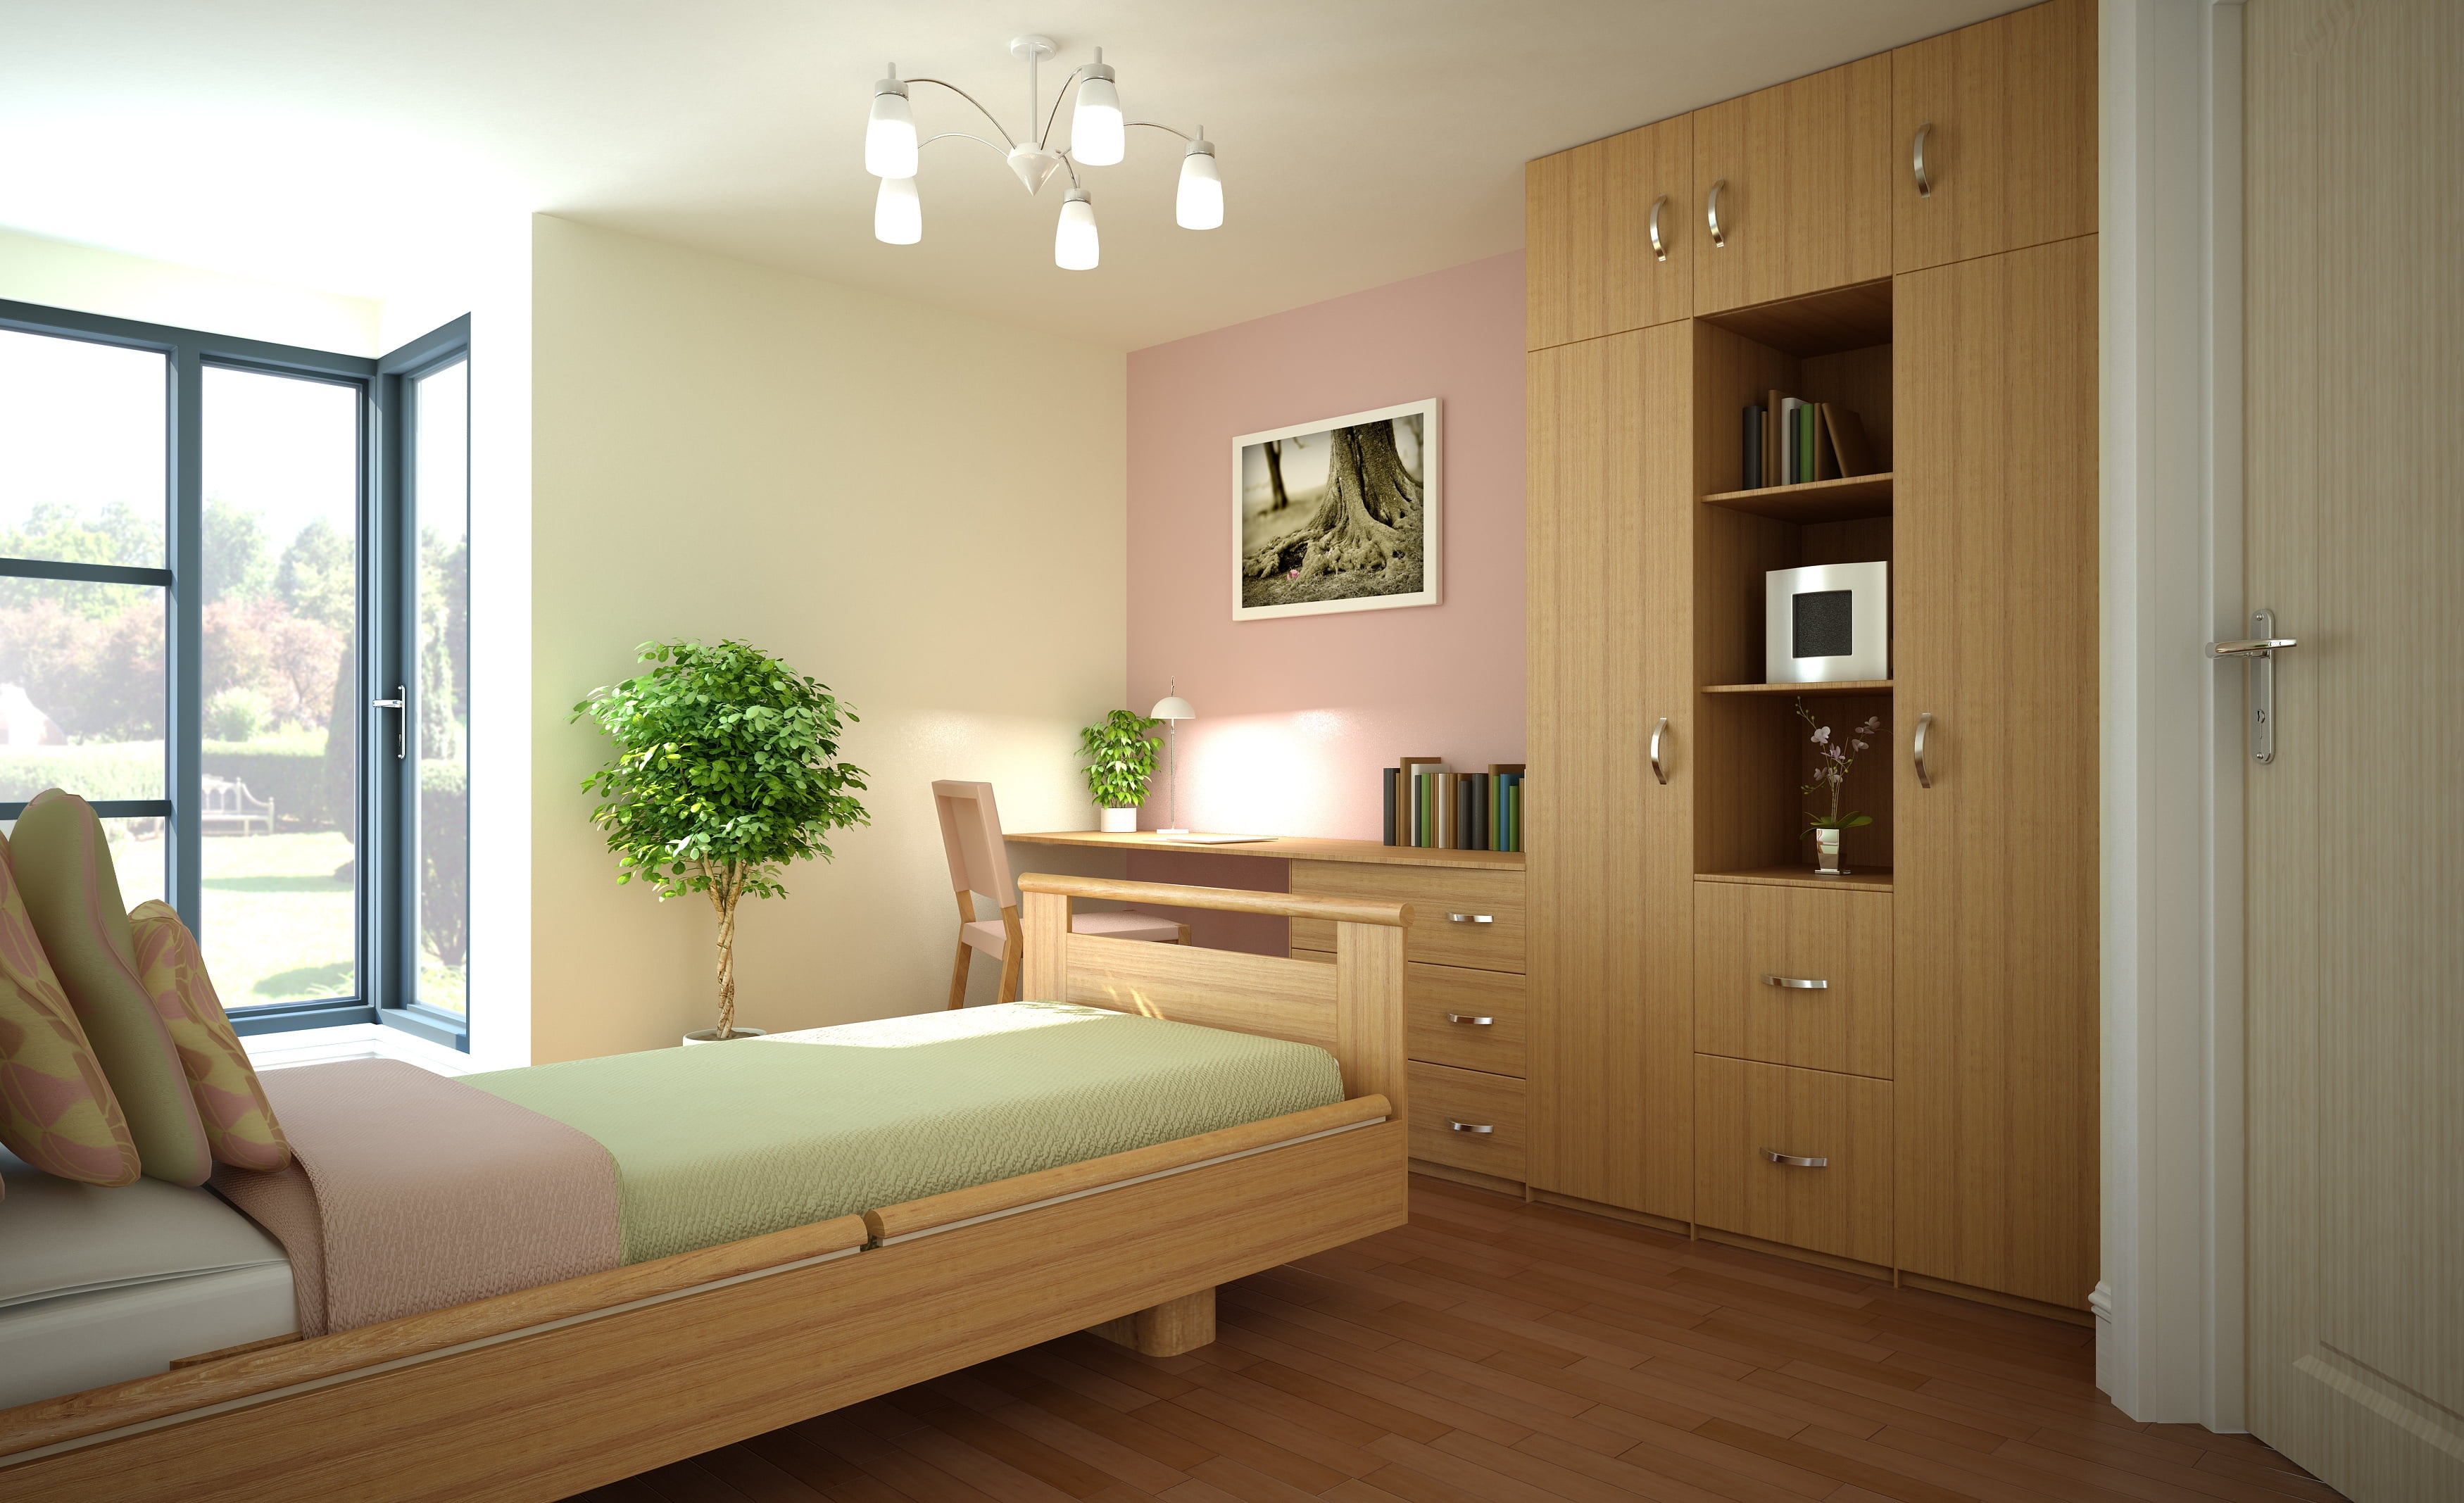 brown wooden bed frame, interior, design, style, home, house